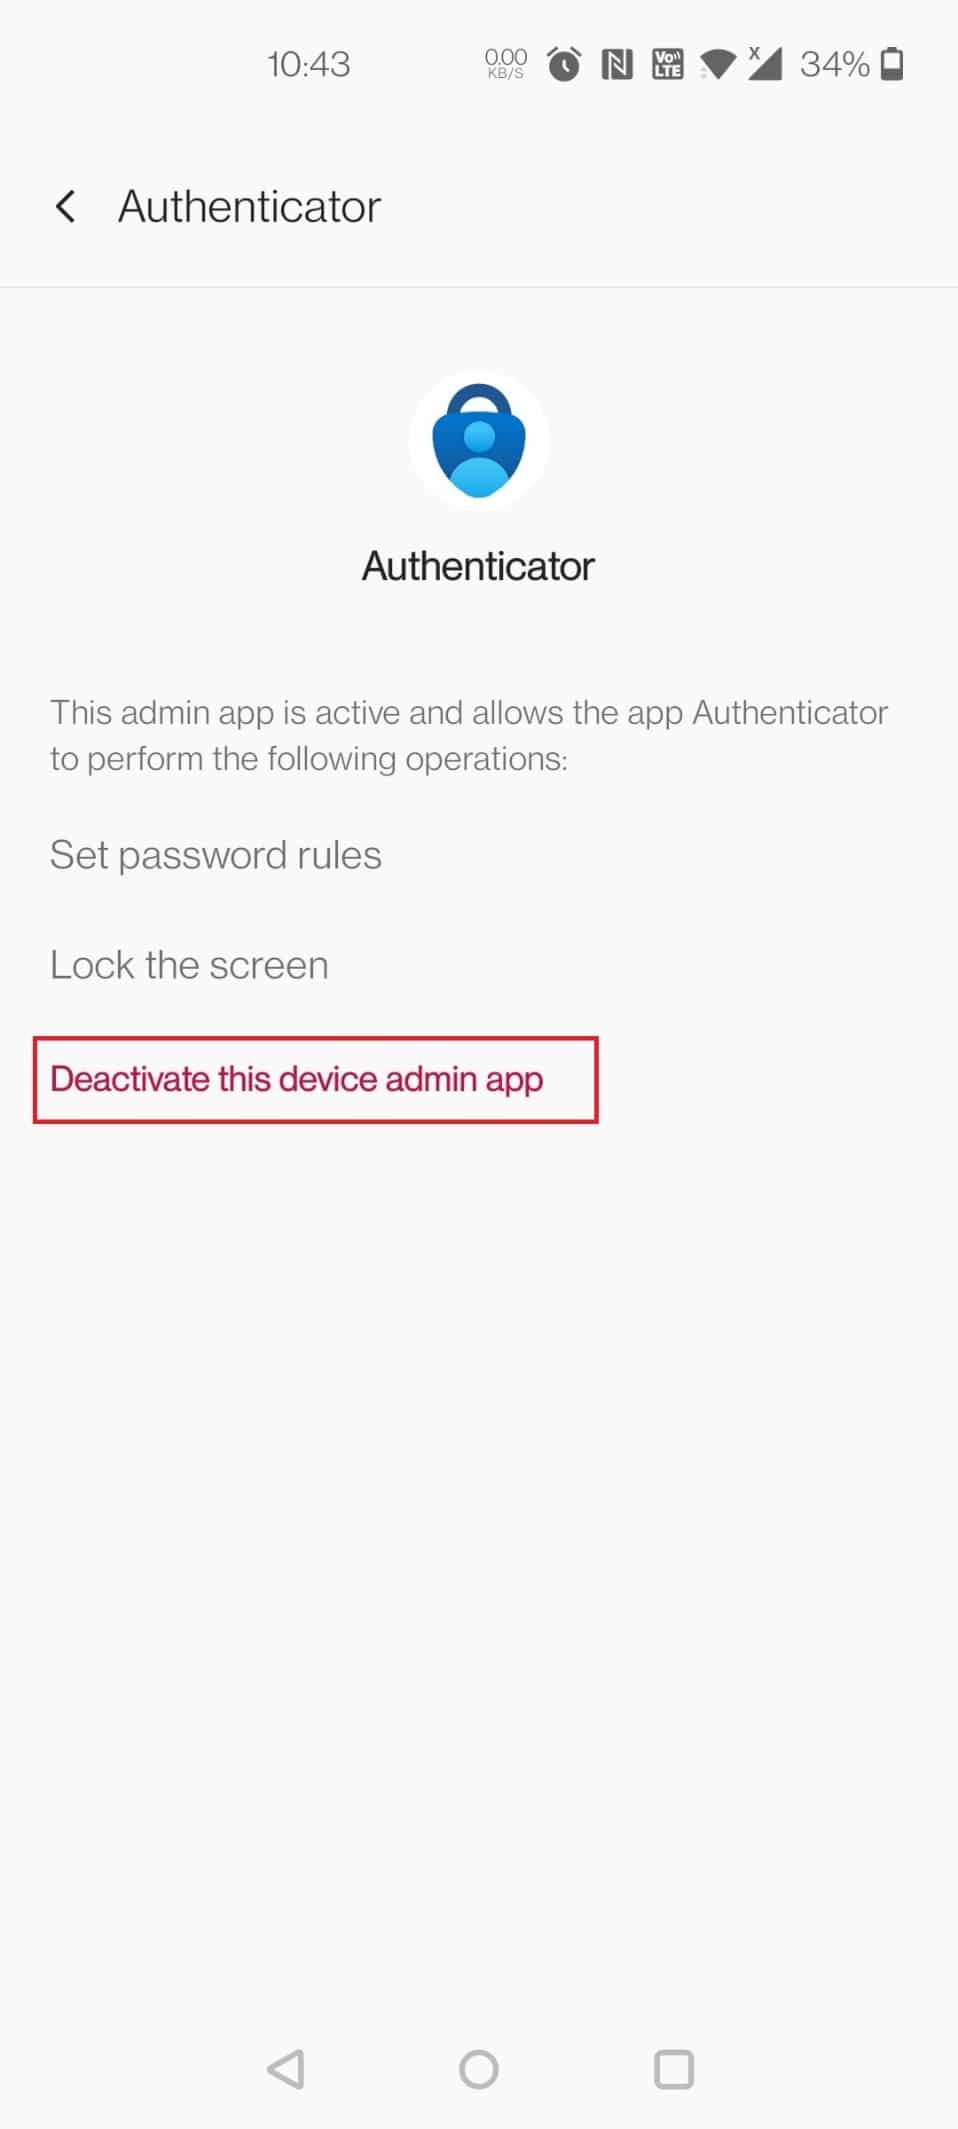 tap on Deactivate this device admin app. Fix Virus Pop Up on Android